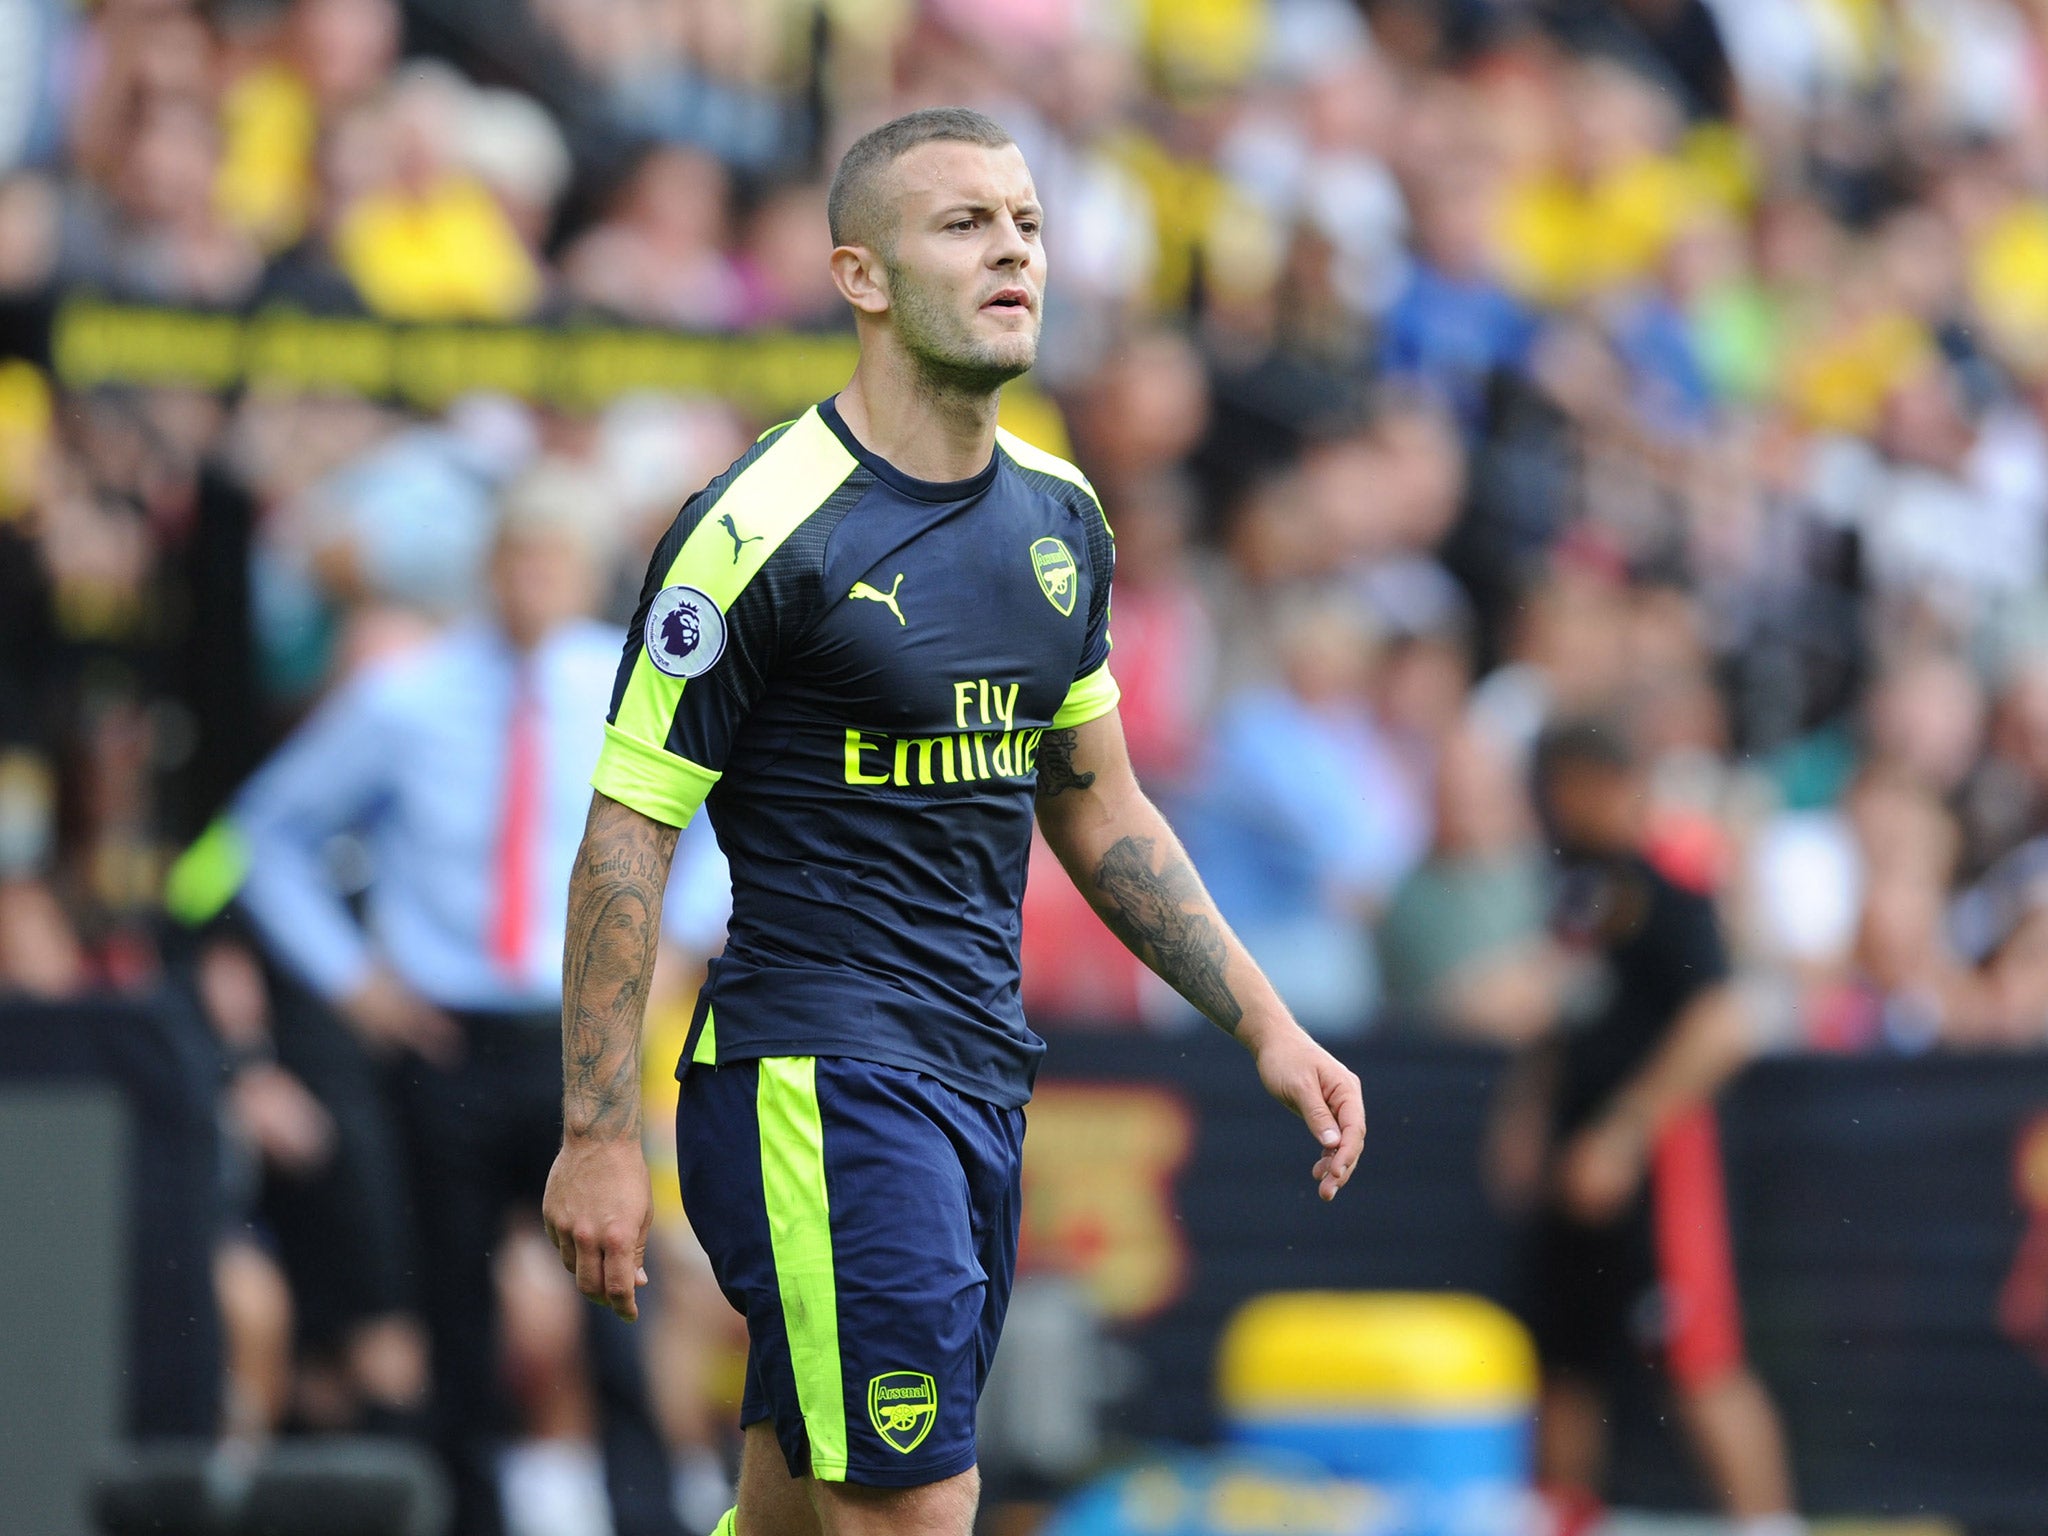 Jack Wilshere has reportedly asked to leave Arsenal on loan this season